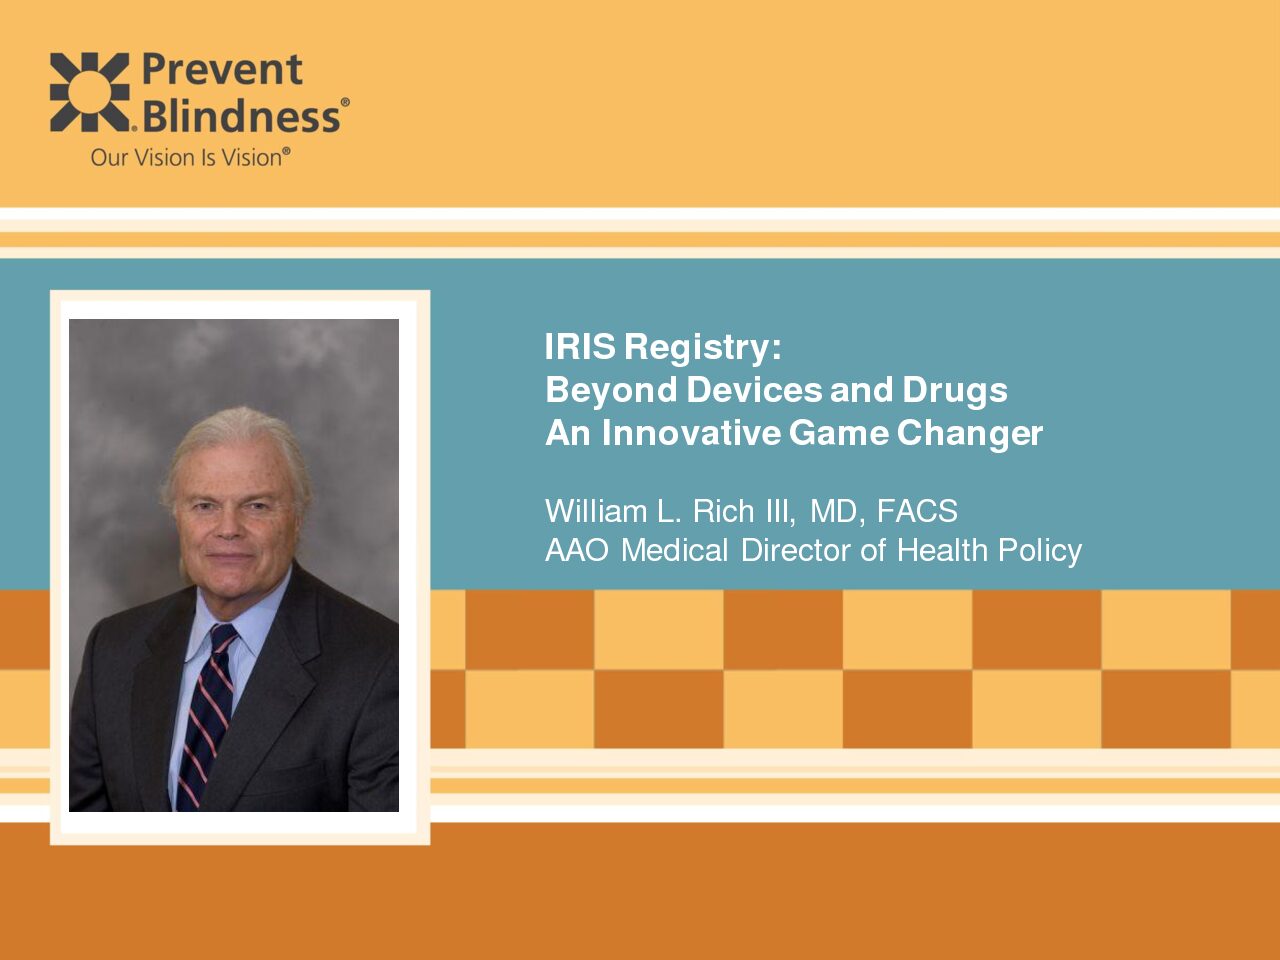 IRIS Registry: Beyond Devices and Drugs – An Innovative Game Changer